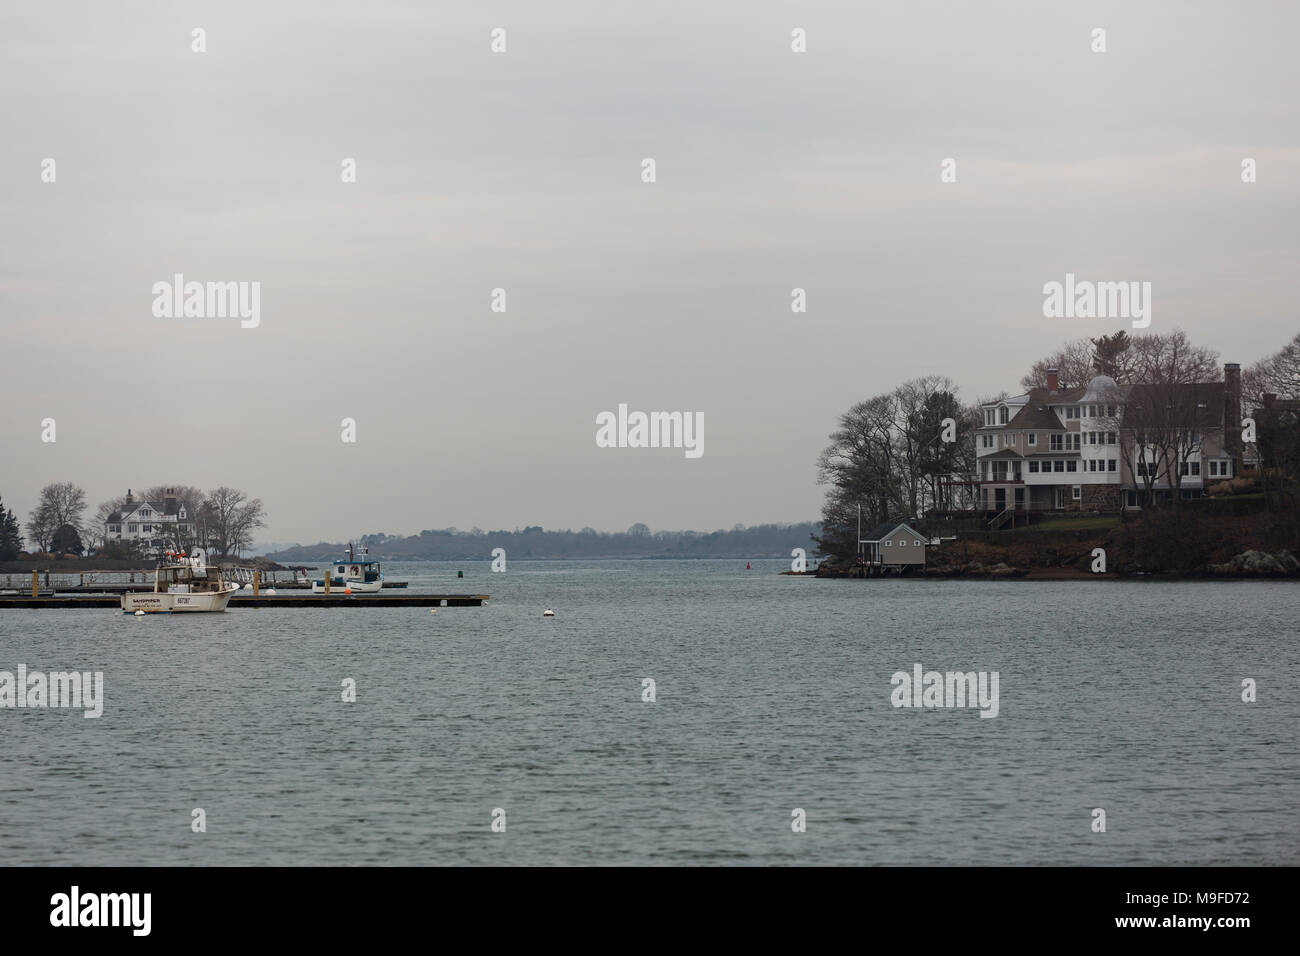 A winter day at the harbor in Manchester-by-the-Sea, Massachusetts. Stock Photo